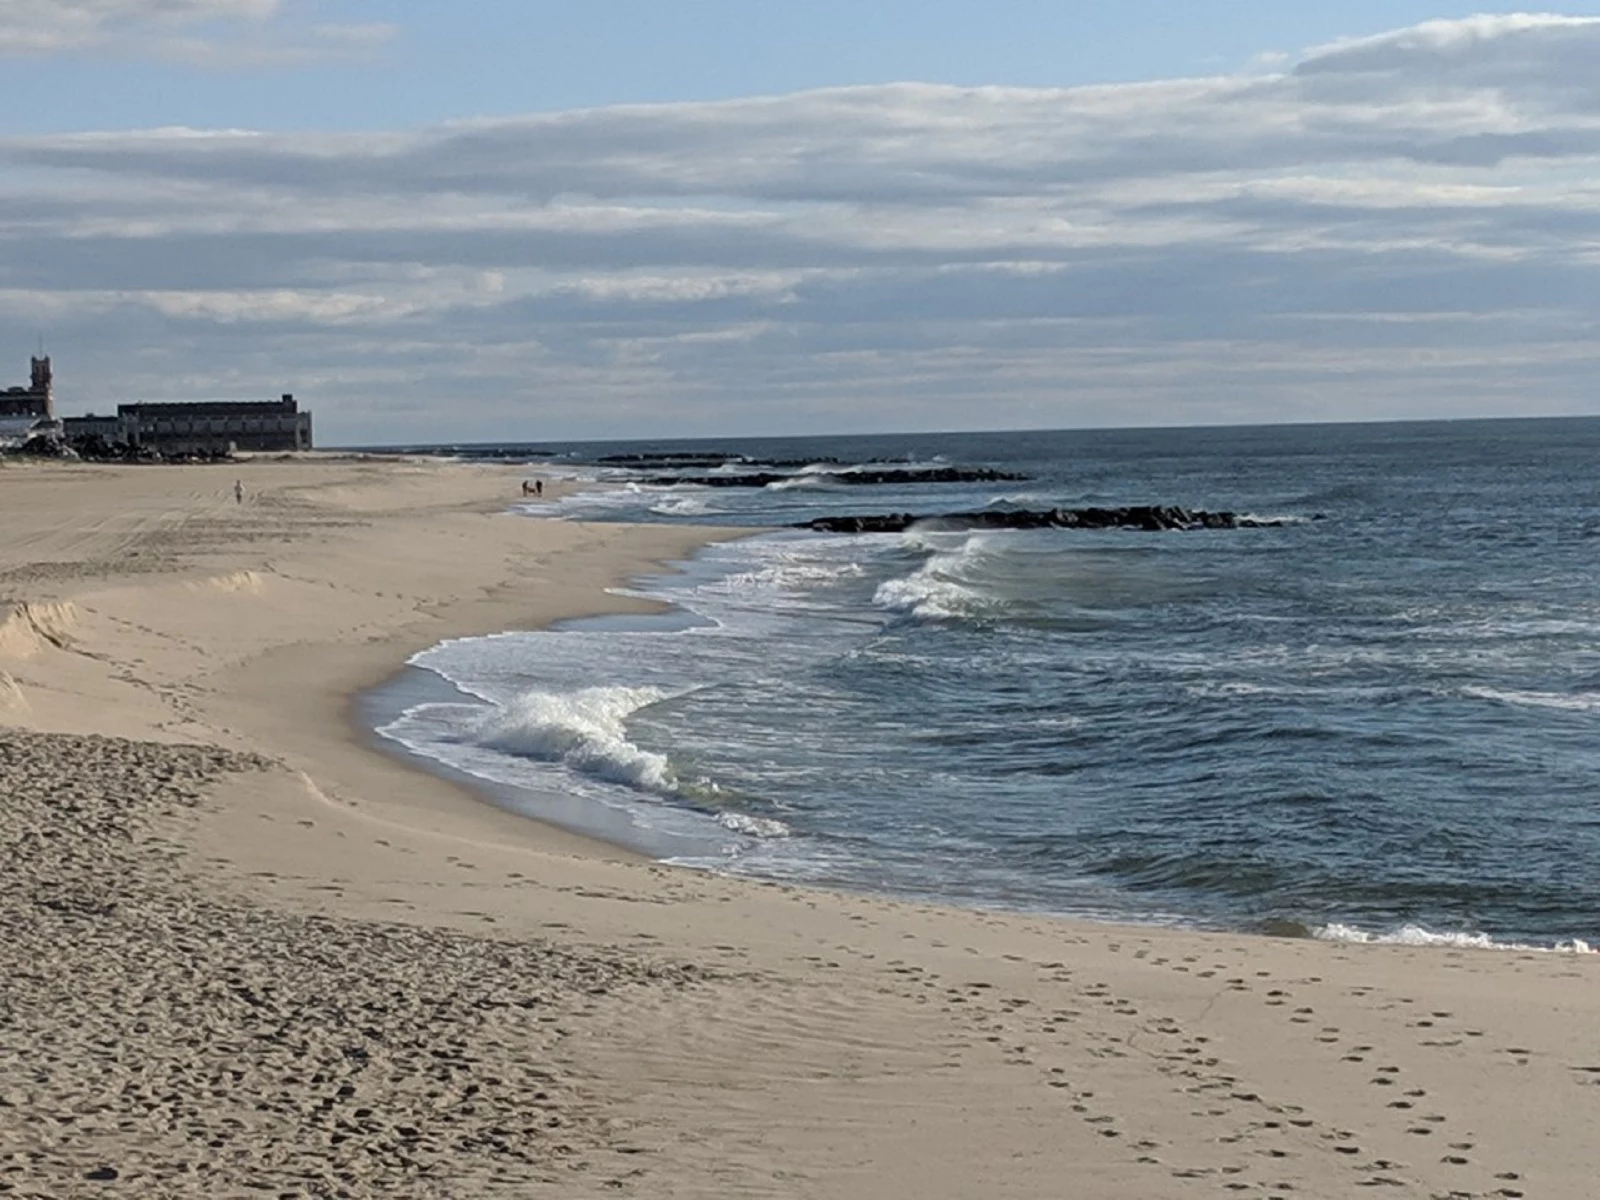 NJ beach weather and waves: Jersey Shore Report for Thu 7/13